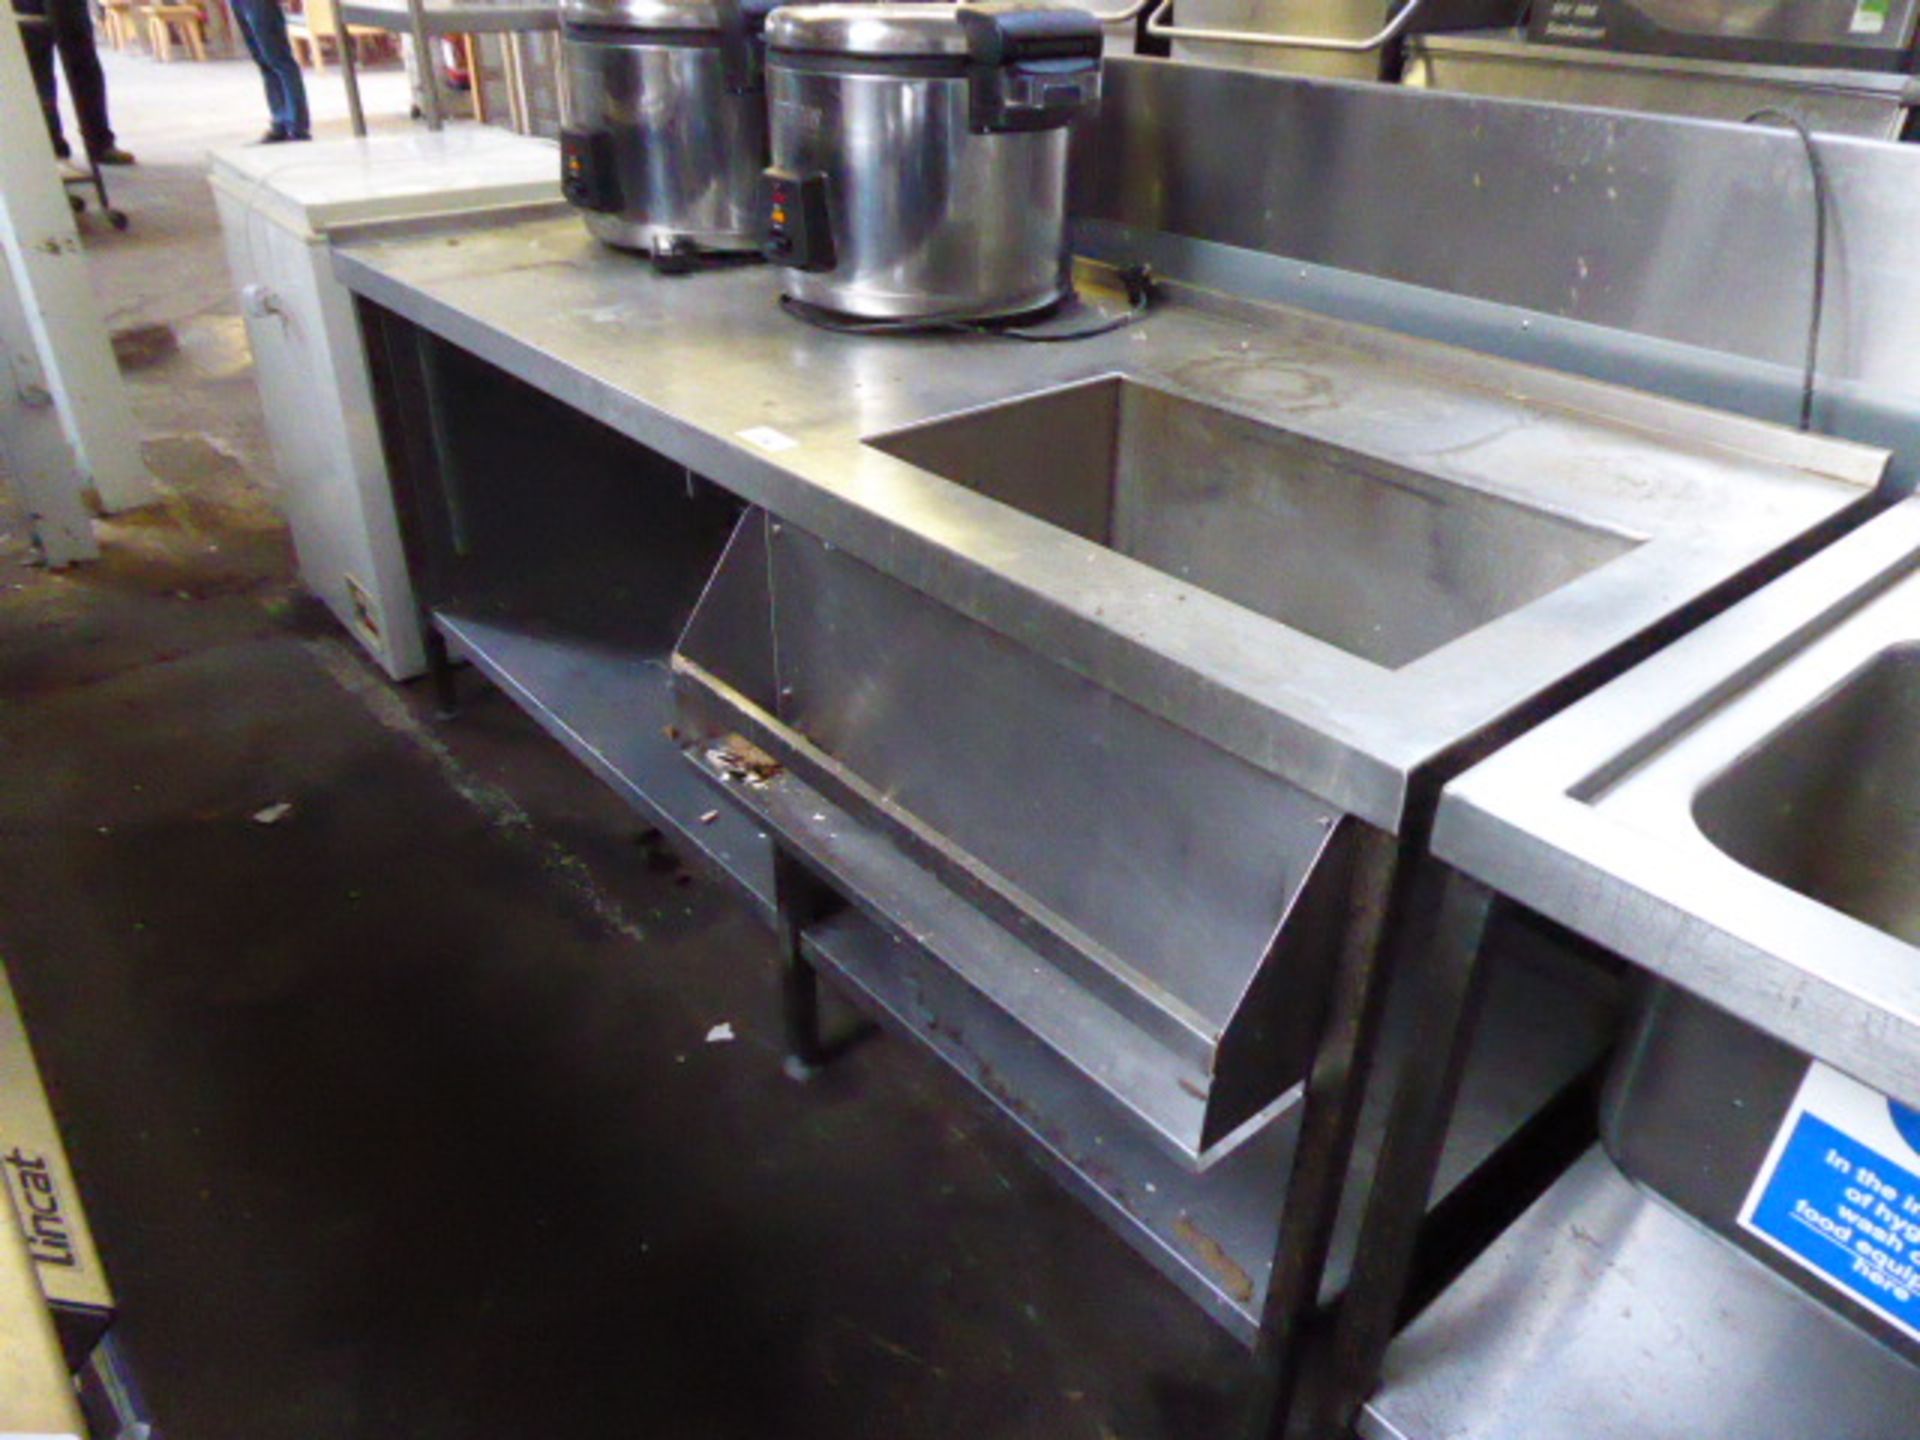 185cm stainless steel back bar area with single bowl sink no taps, preparation area and shelf under